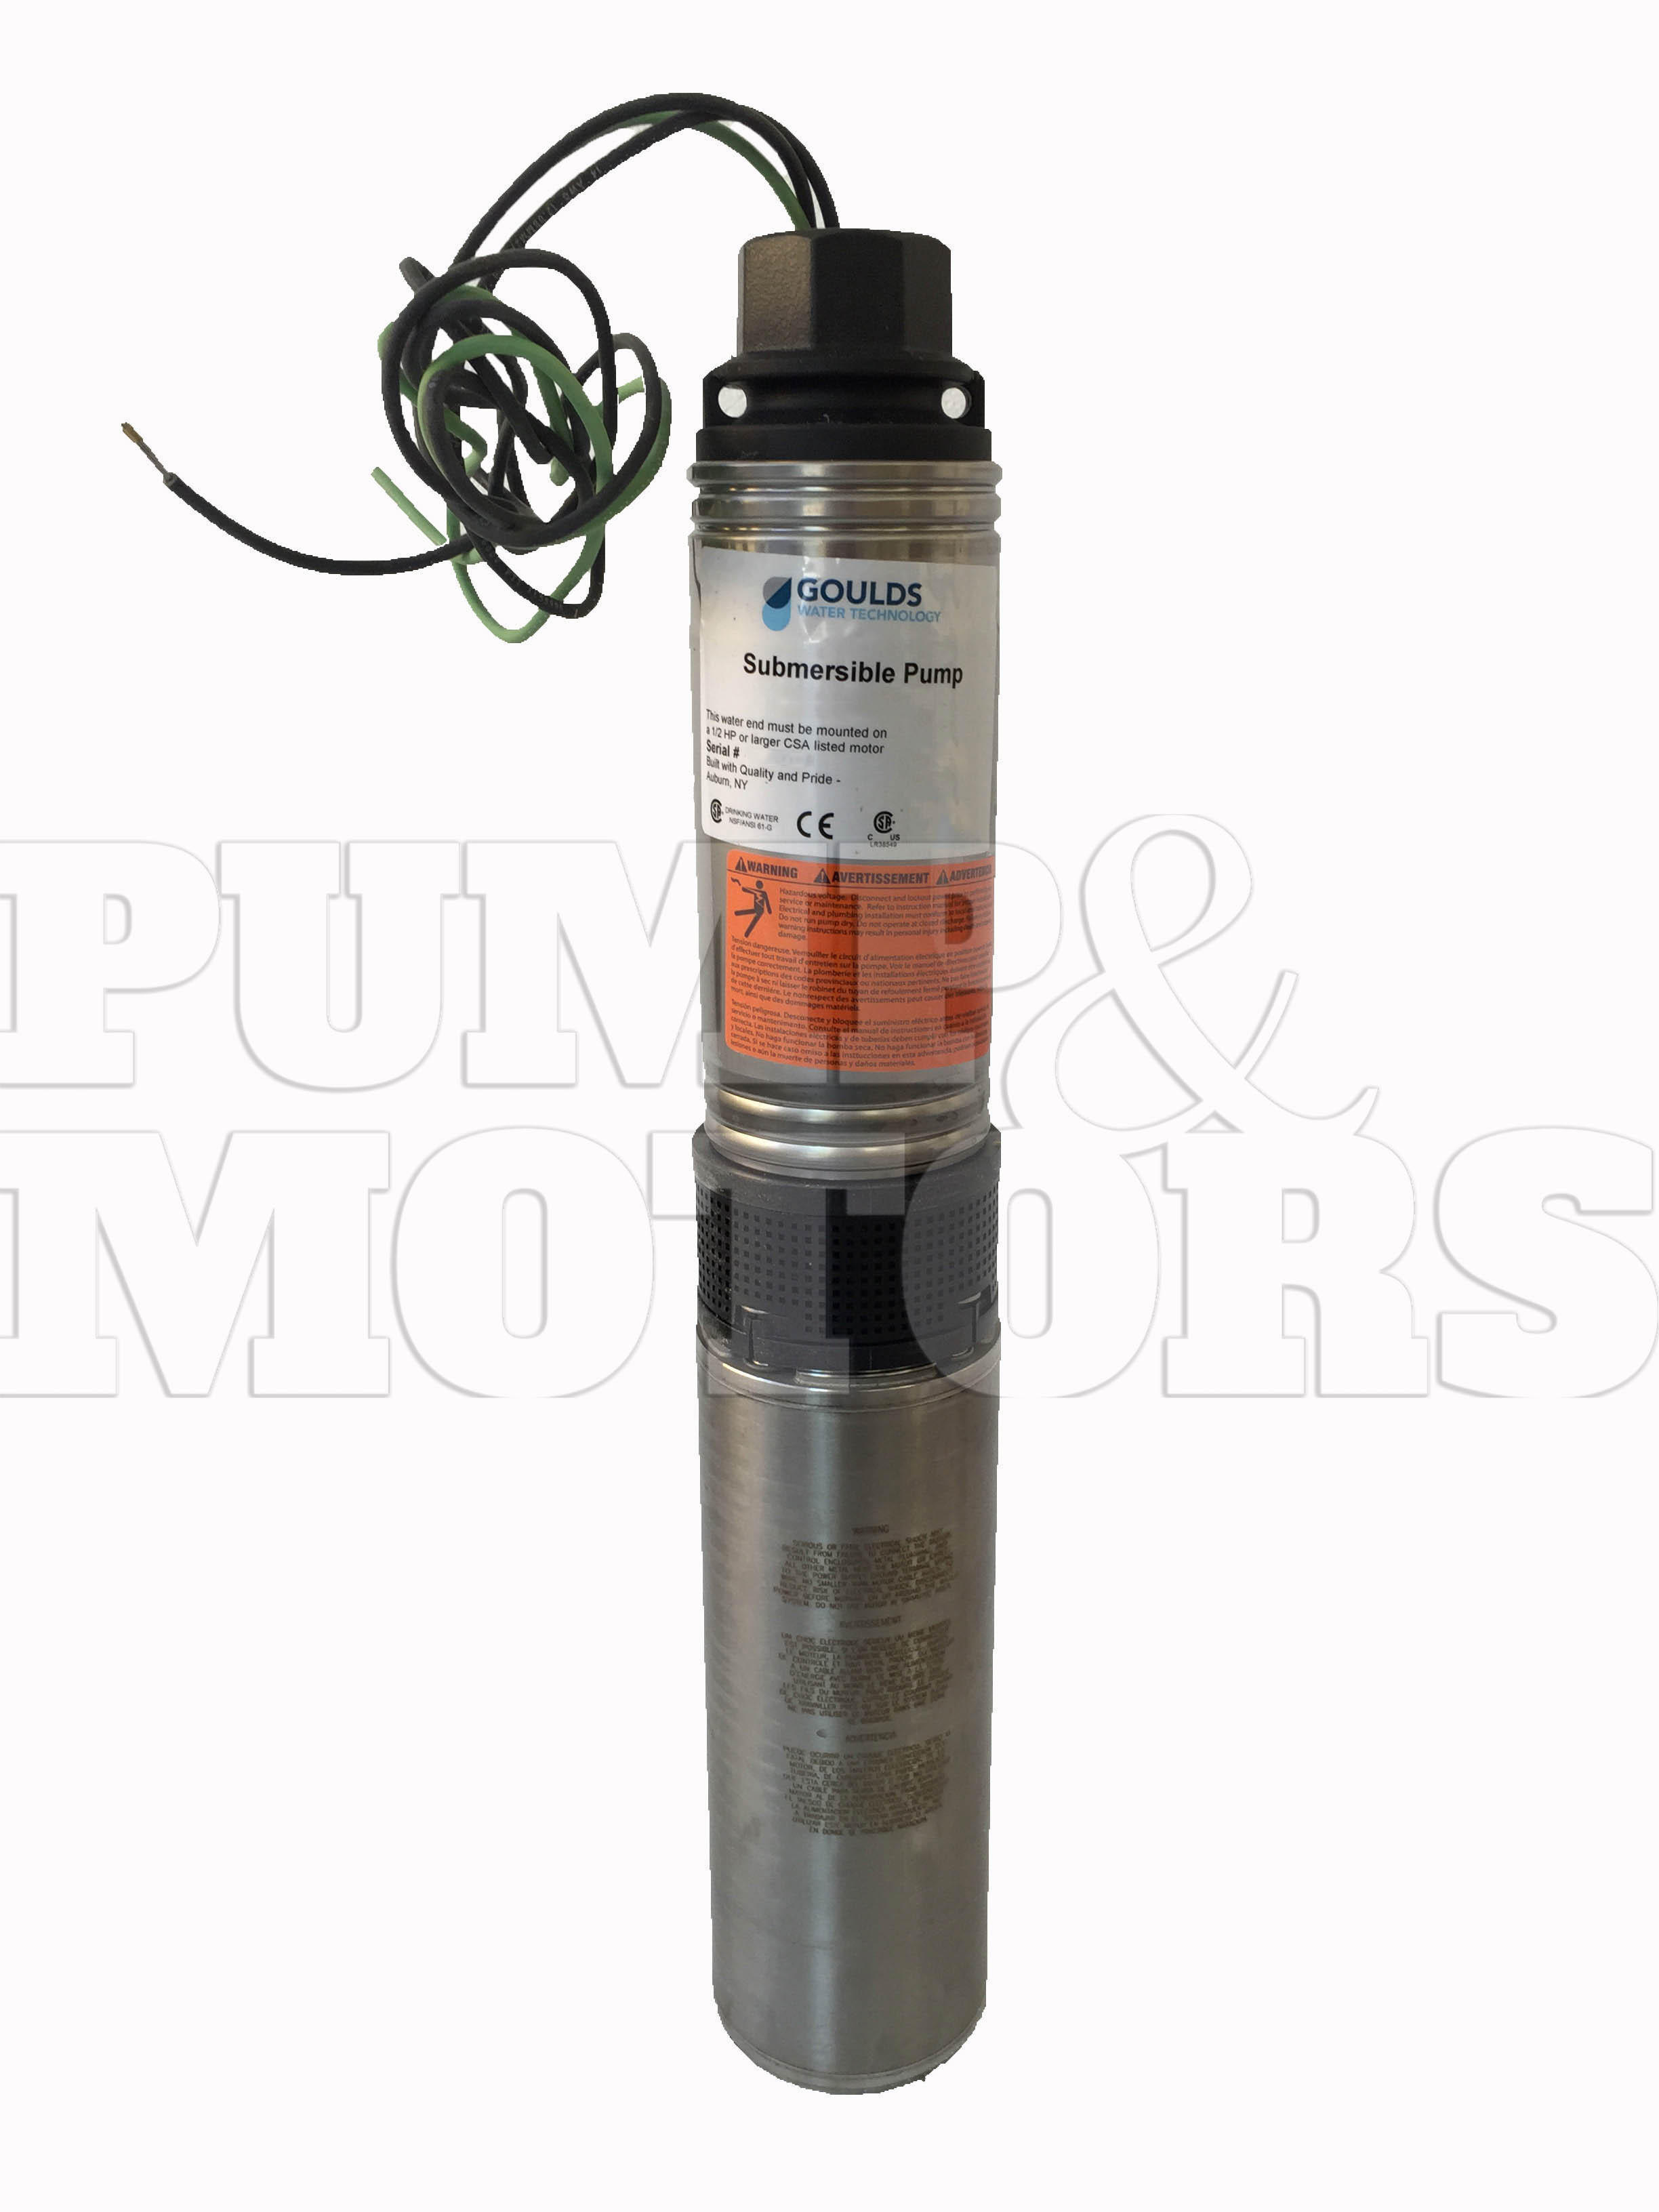 Goulds 25HS15422C 1.5HP 230V Submersible Water Well Pump 25GPM